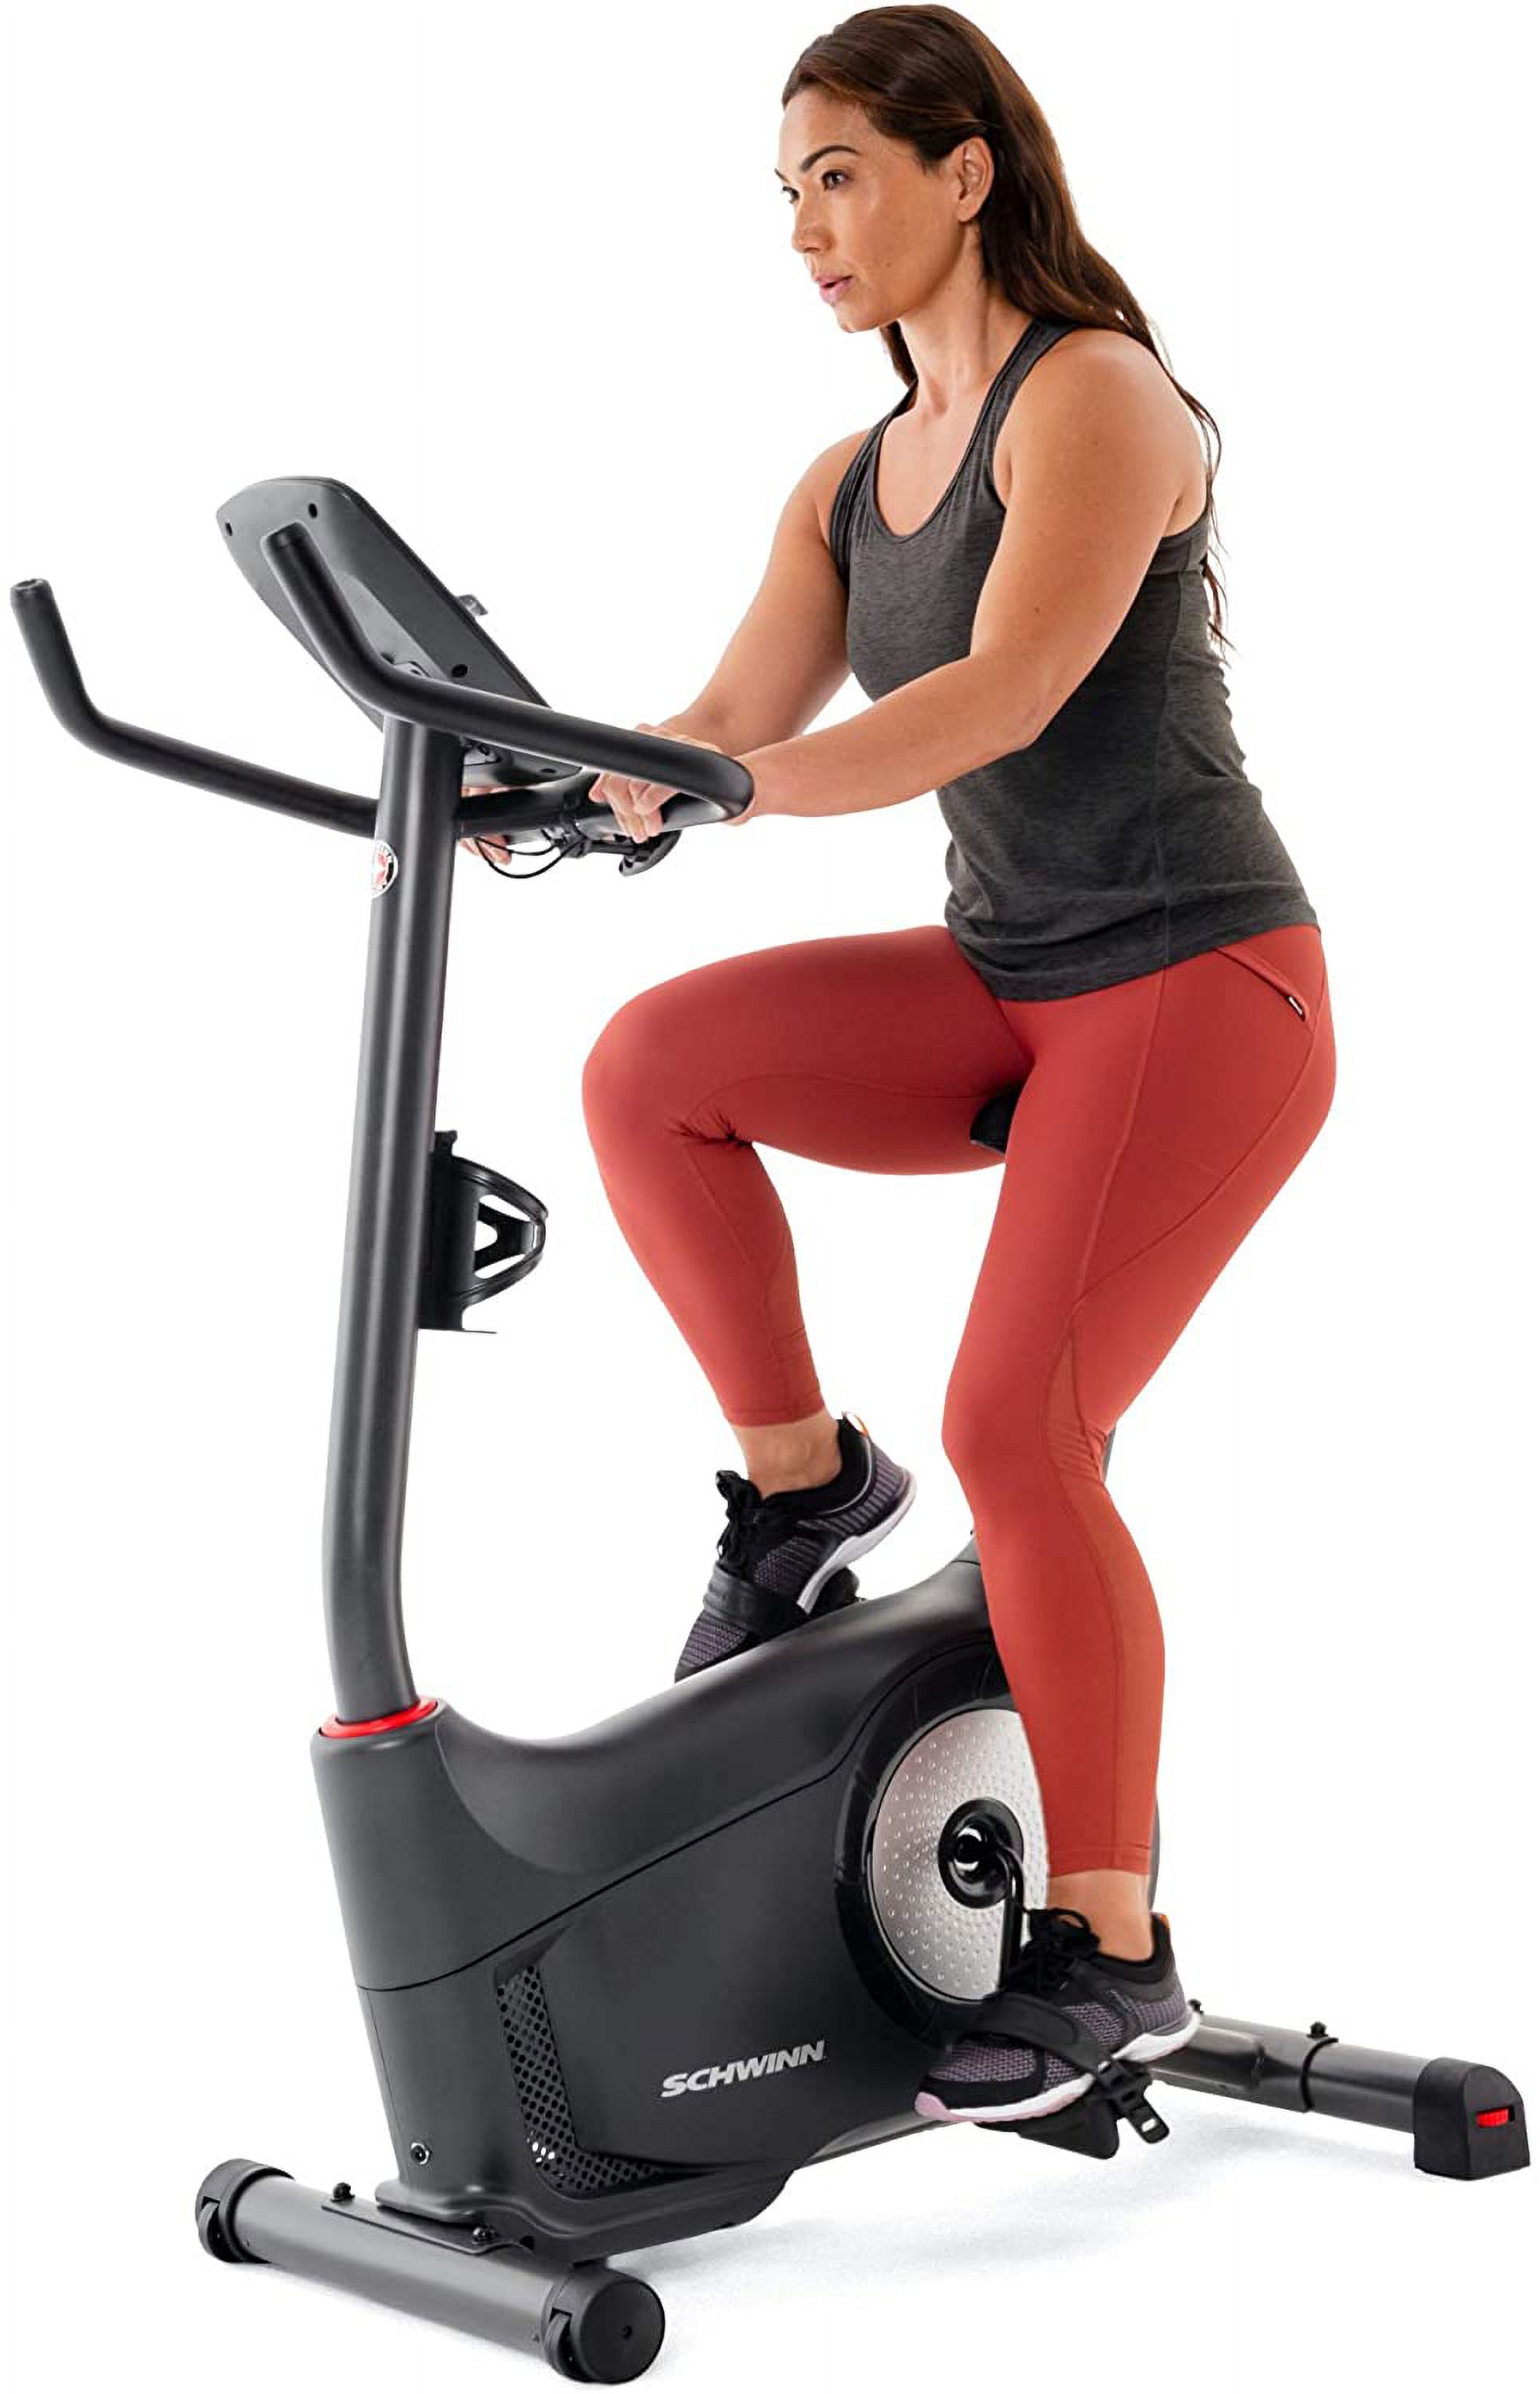 Schwinn Fitness 130 Upright Stationary Cardio Home Workout Cycling Exercise Bike - image 9 of 9